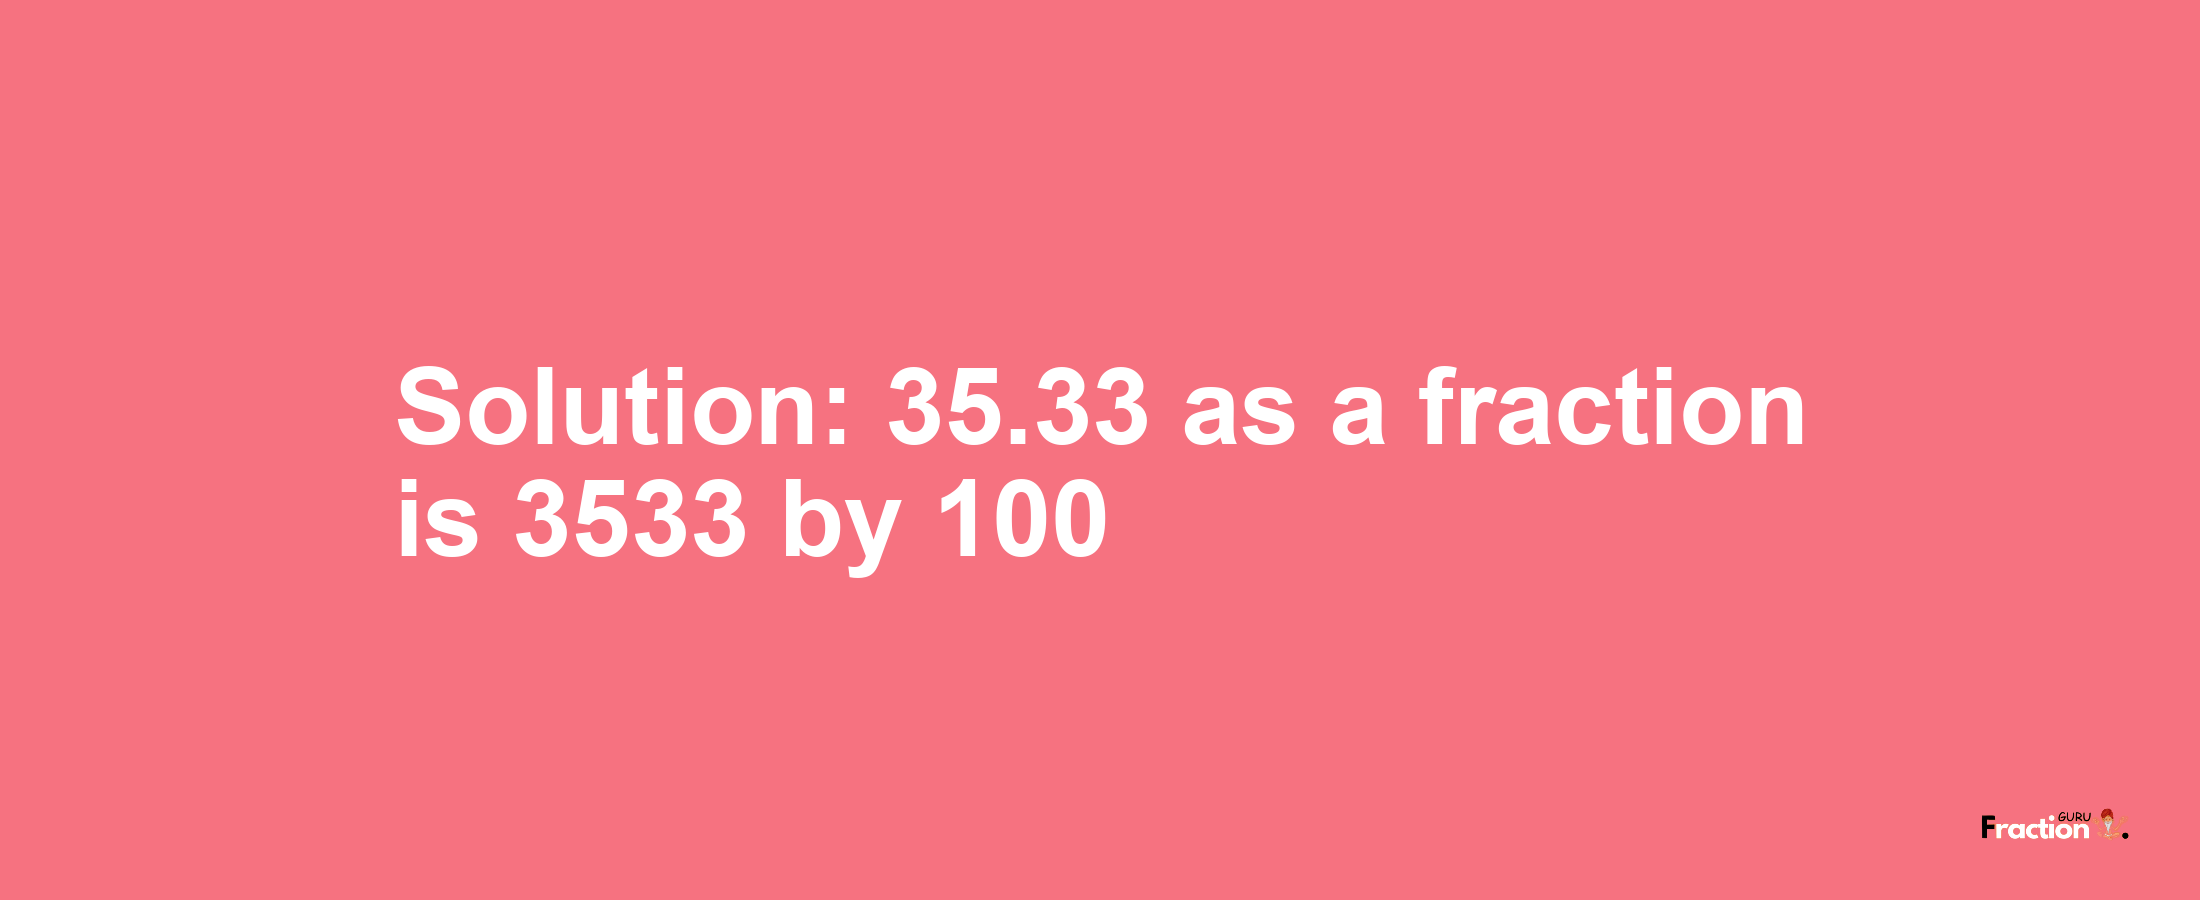 Solution:35.33 as a fraction is 3533/100